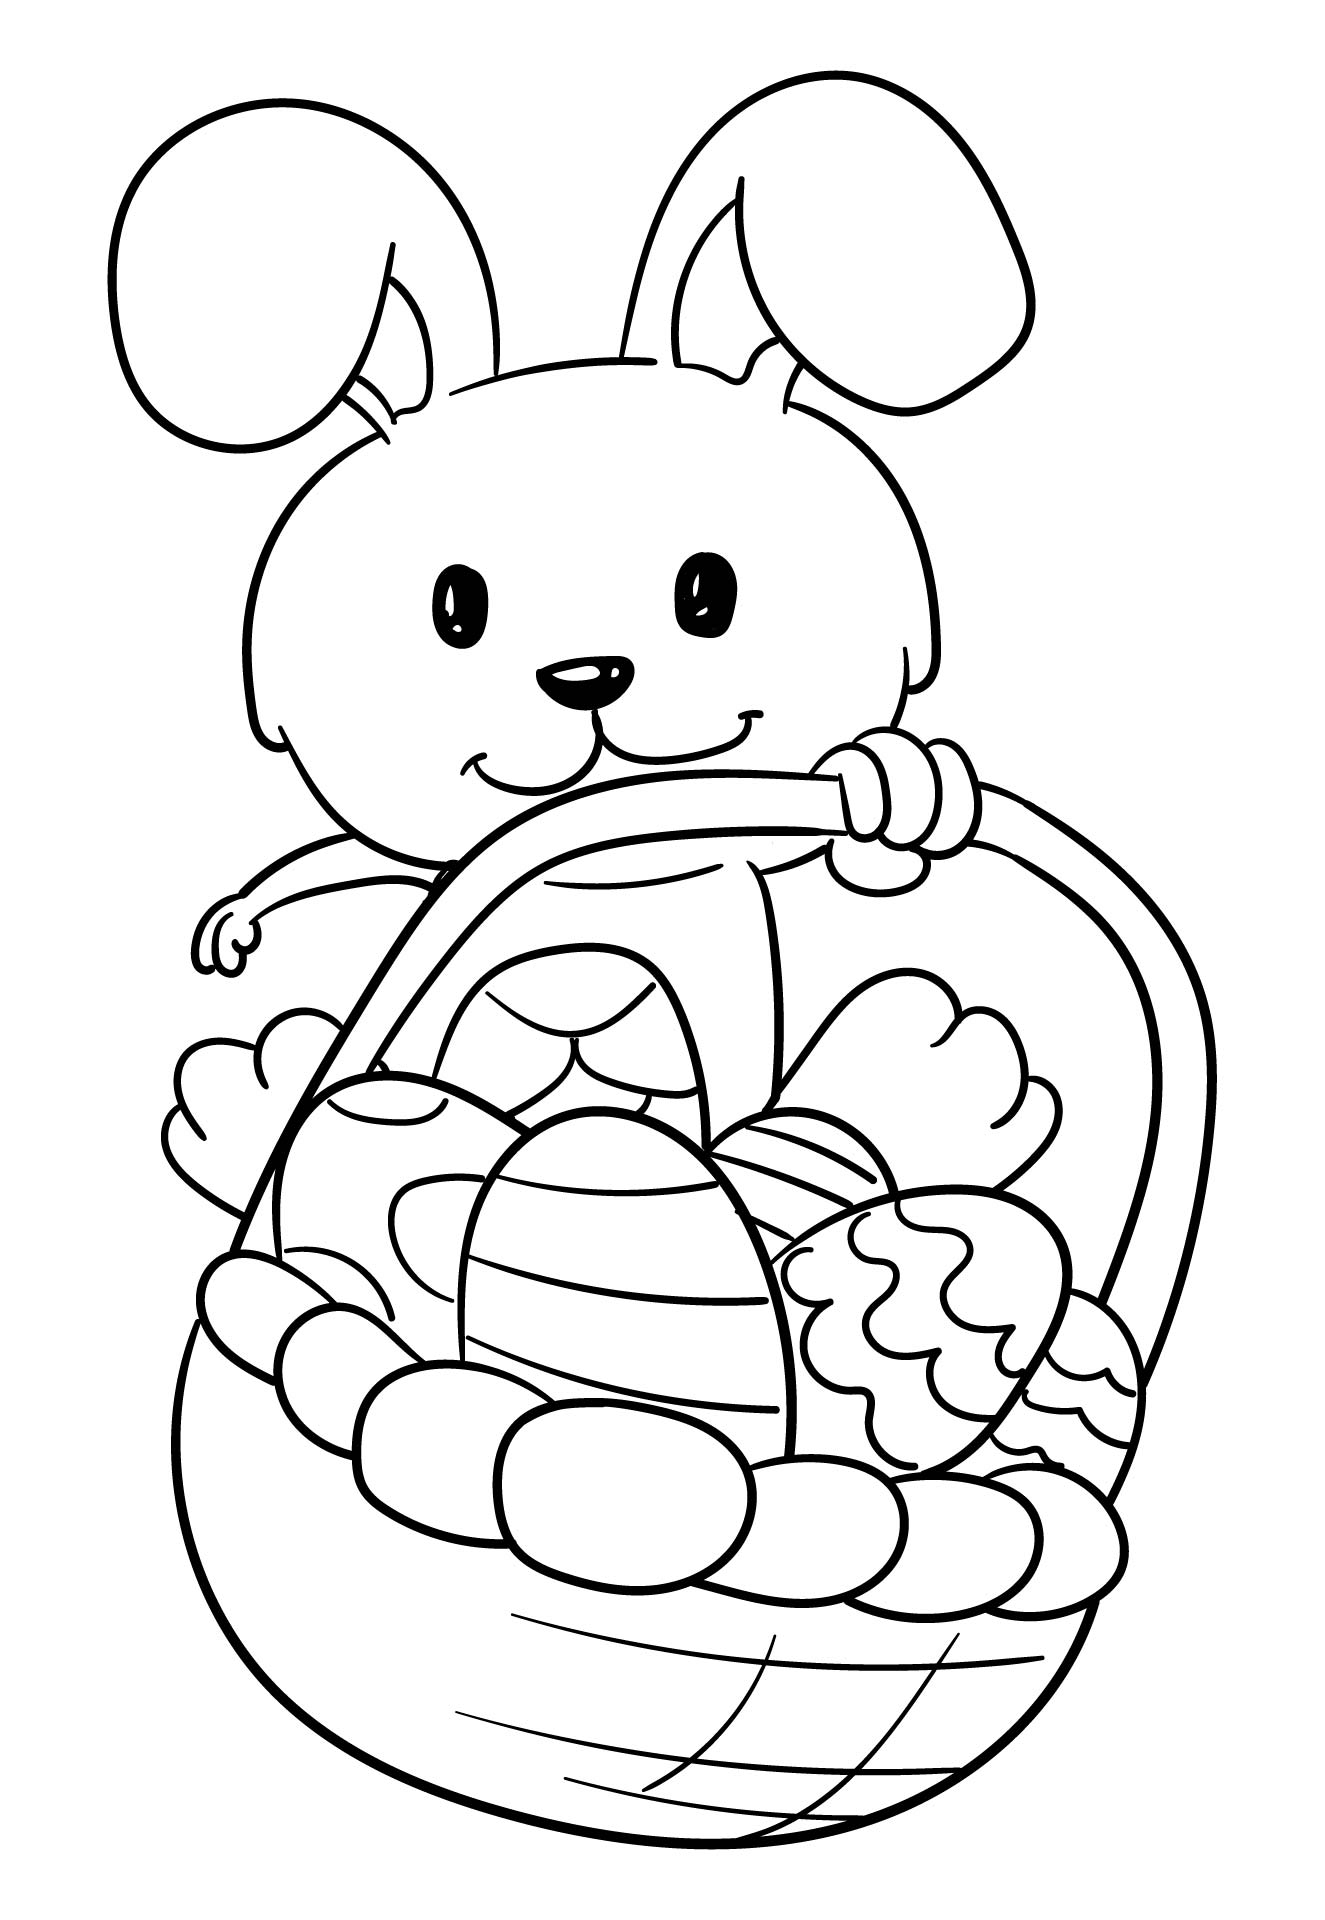 Printable Animal Coloring Pages Easter Eggs